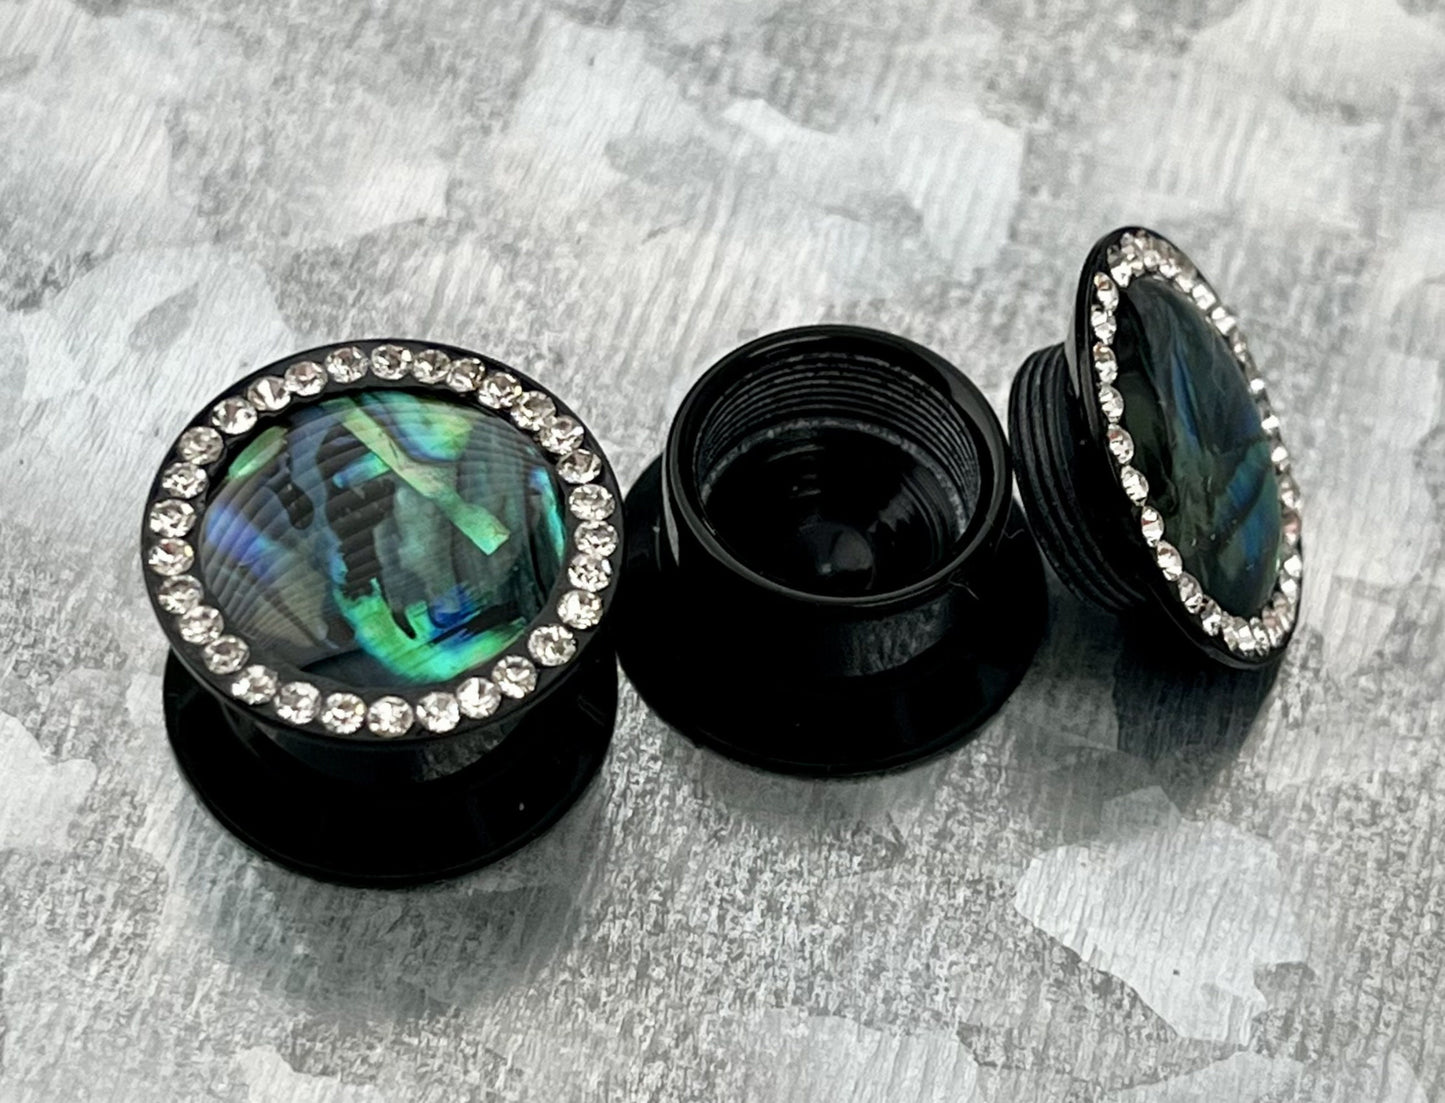 PAIR of Unique Abalone Center Inlay with CZ Gem Acrylic Screw Fit Stash Plugs - ONLY Gauges 1/2" (12mm) & 9/16 (14mm) Available!